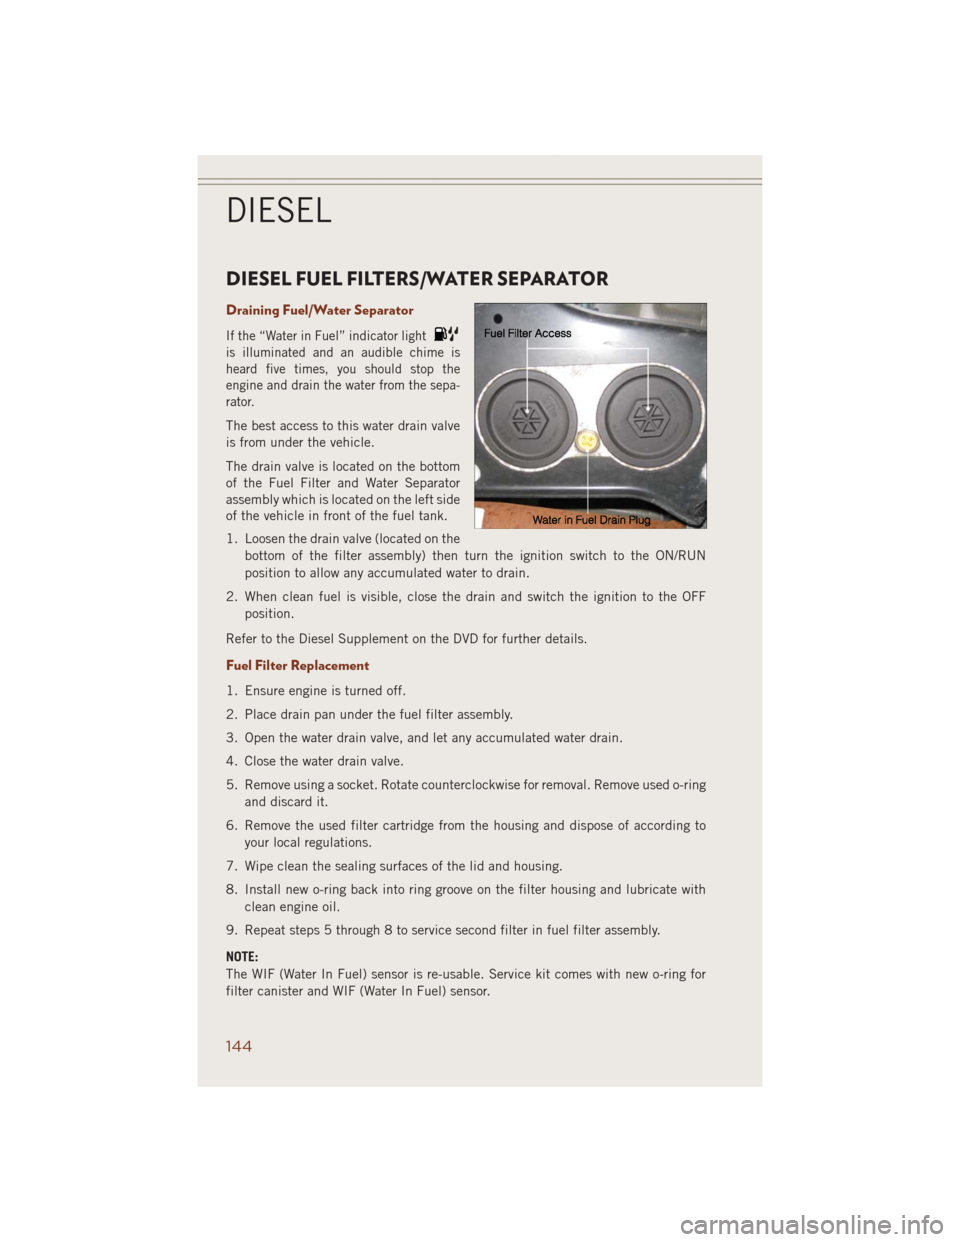 JEEP GRAND CHEROKEE 2014 WK2 / 4.G User Guide DIESEL FUEL FILTERS/WATER SEPARATOR
Draining Fuel/Water Separator
If the “Water in Fuel” indicator light
is illuminated and an audible chime is
heard five times, you should stop the
engine and dra